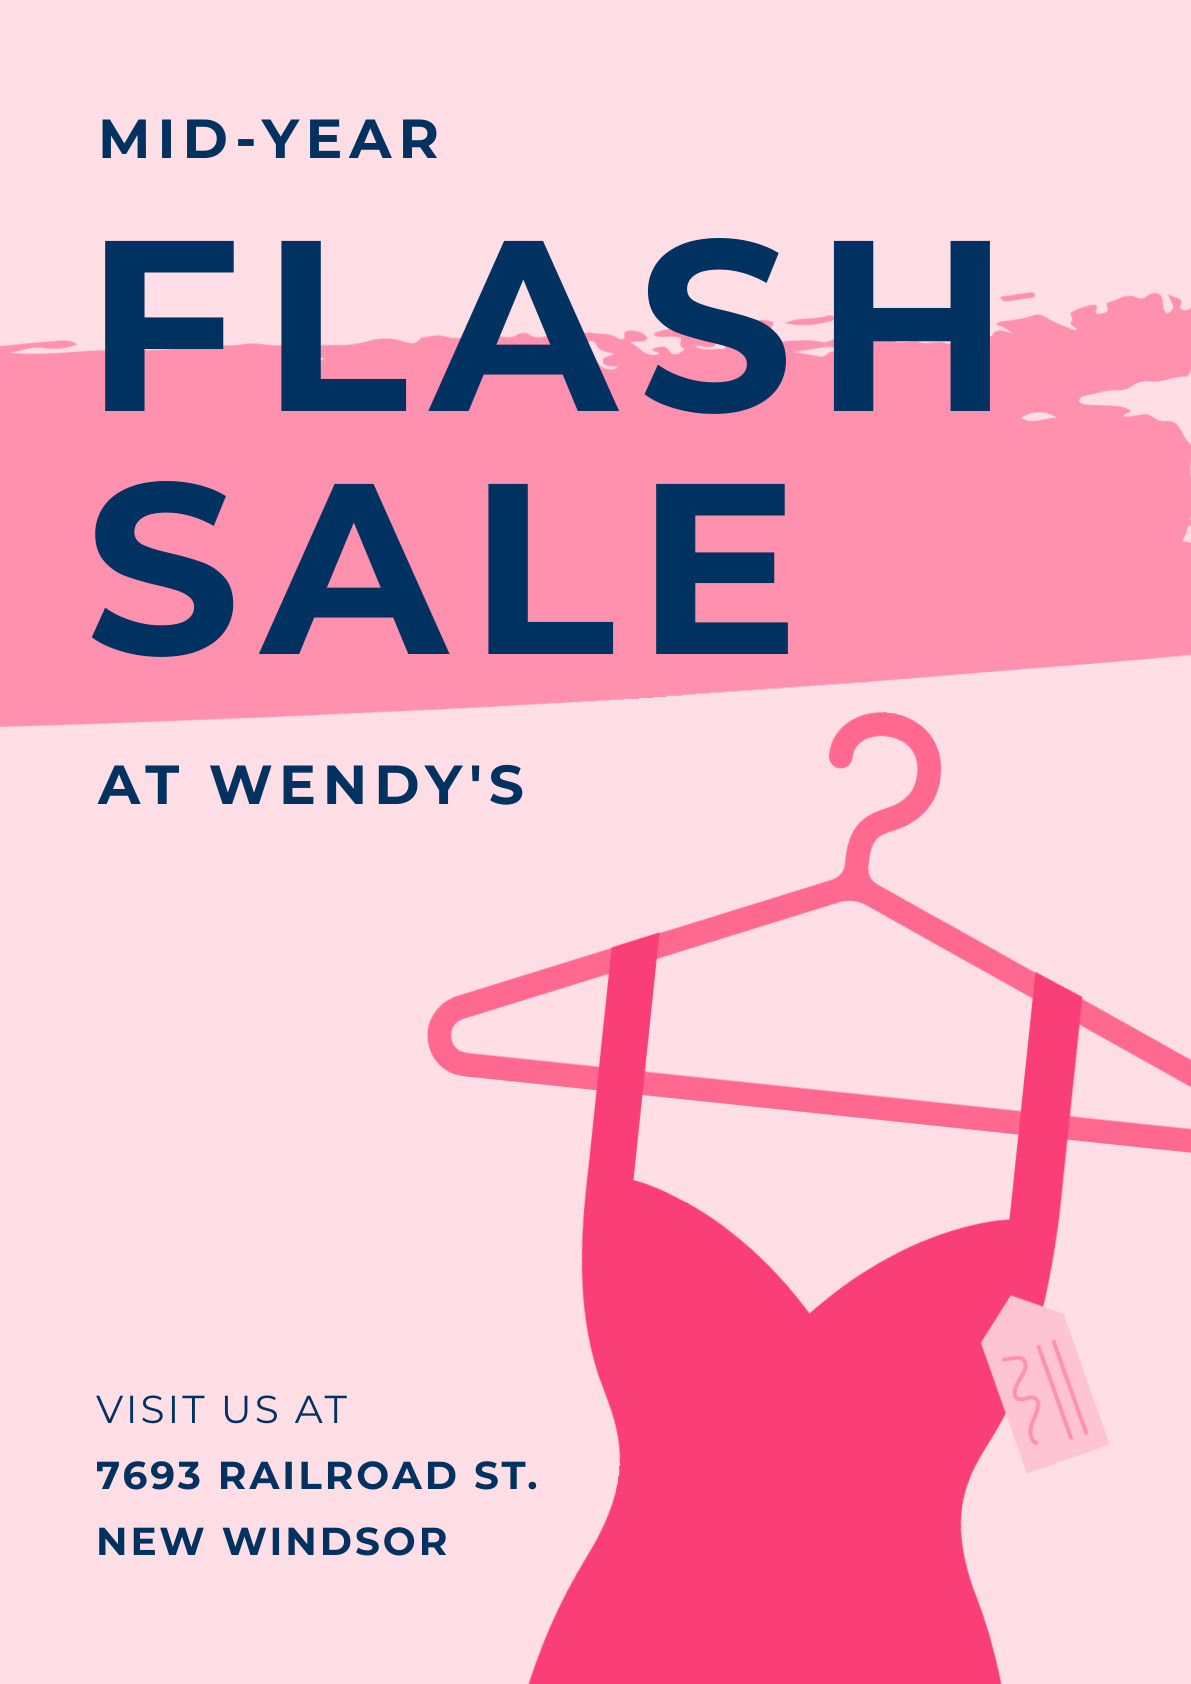 Mid-year Flash Clothes Sale – Poster Template